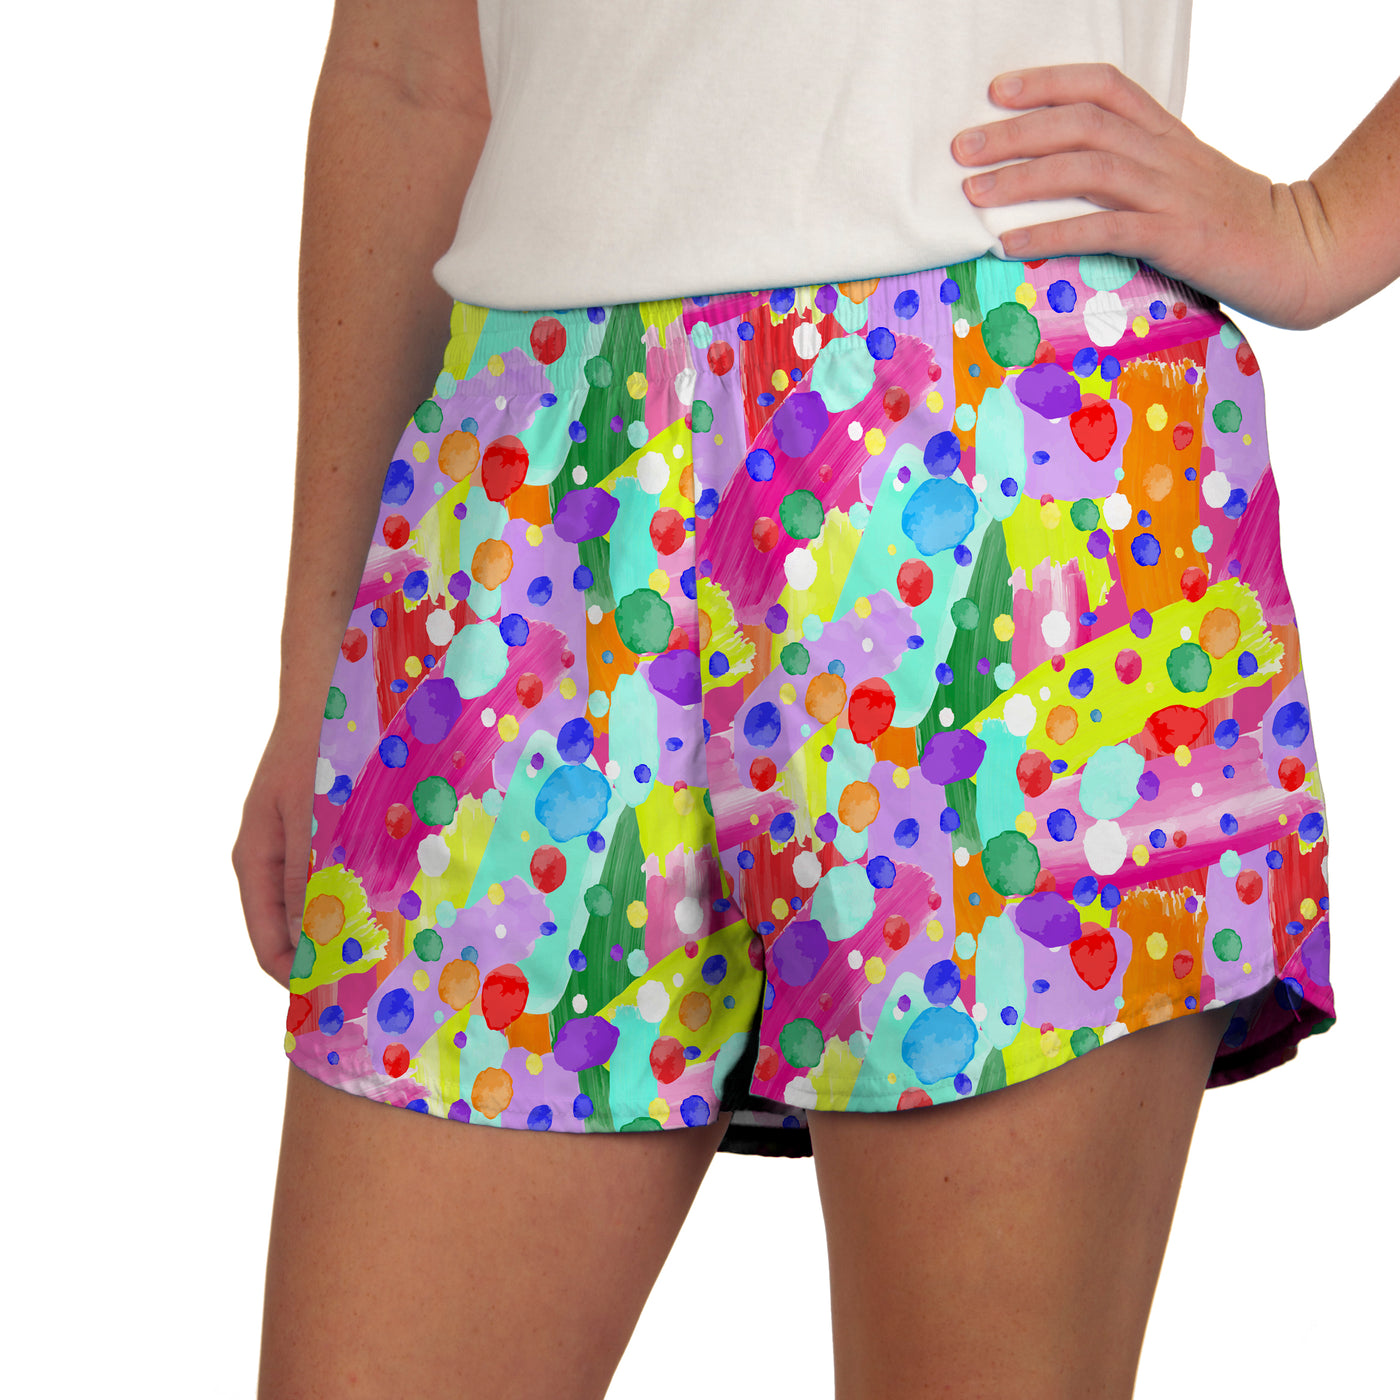 STEPH SHORTS - SEEING DOTS